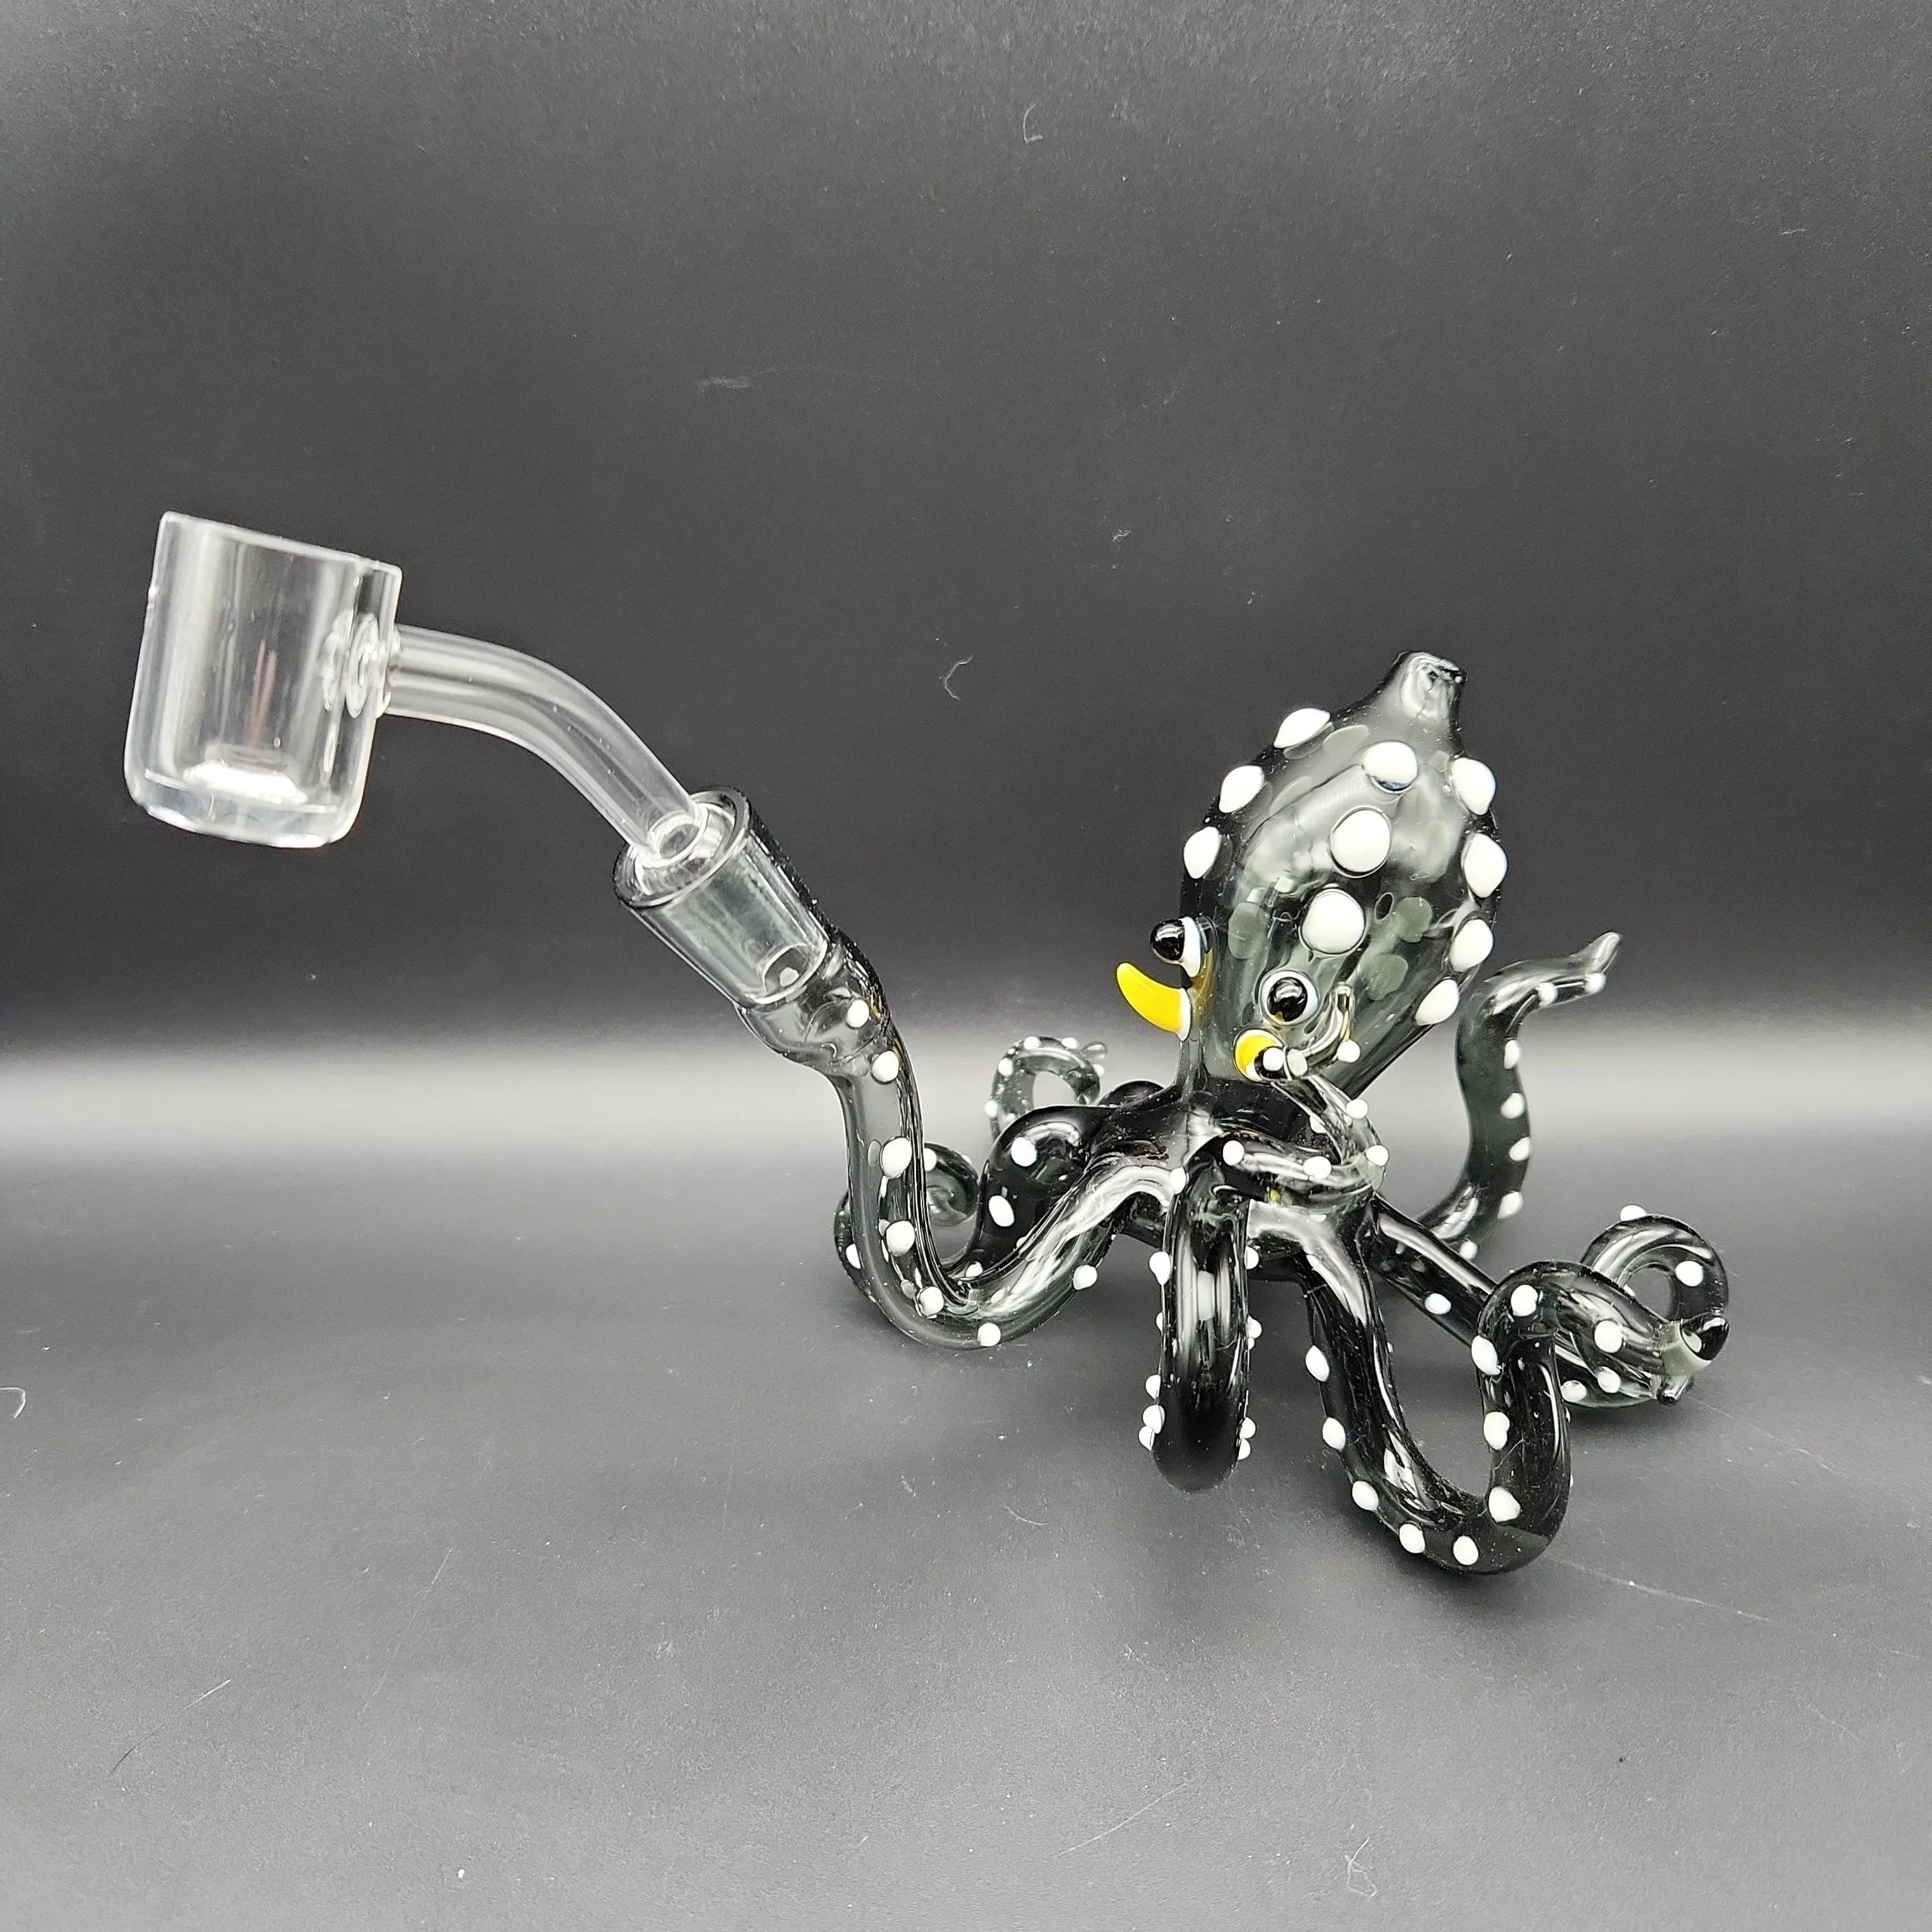 7" Colored Octopus Dab Rig